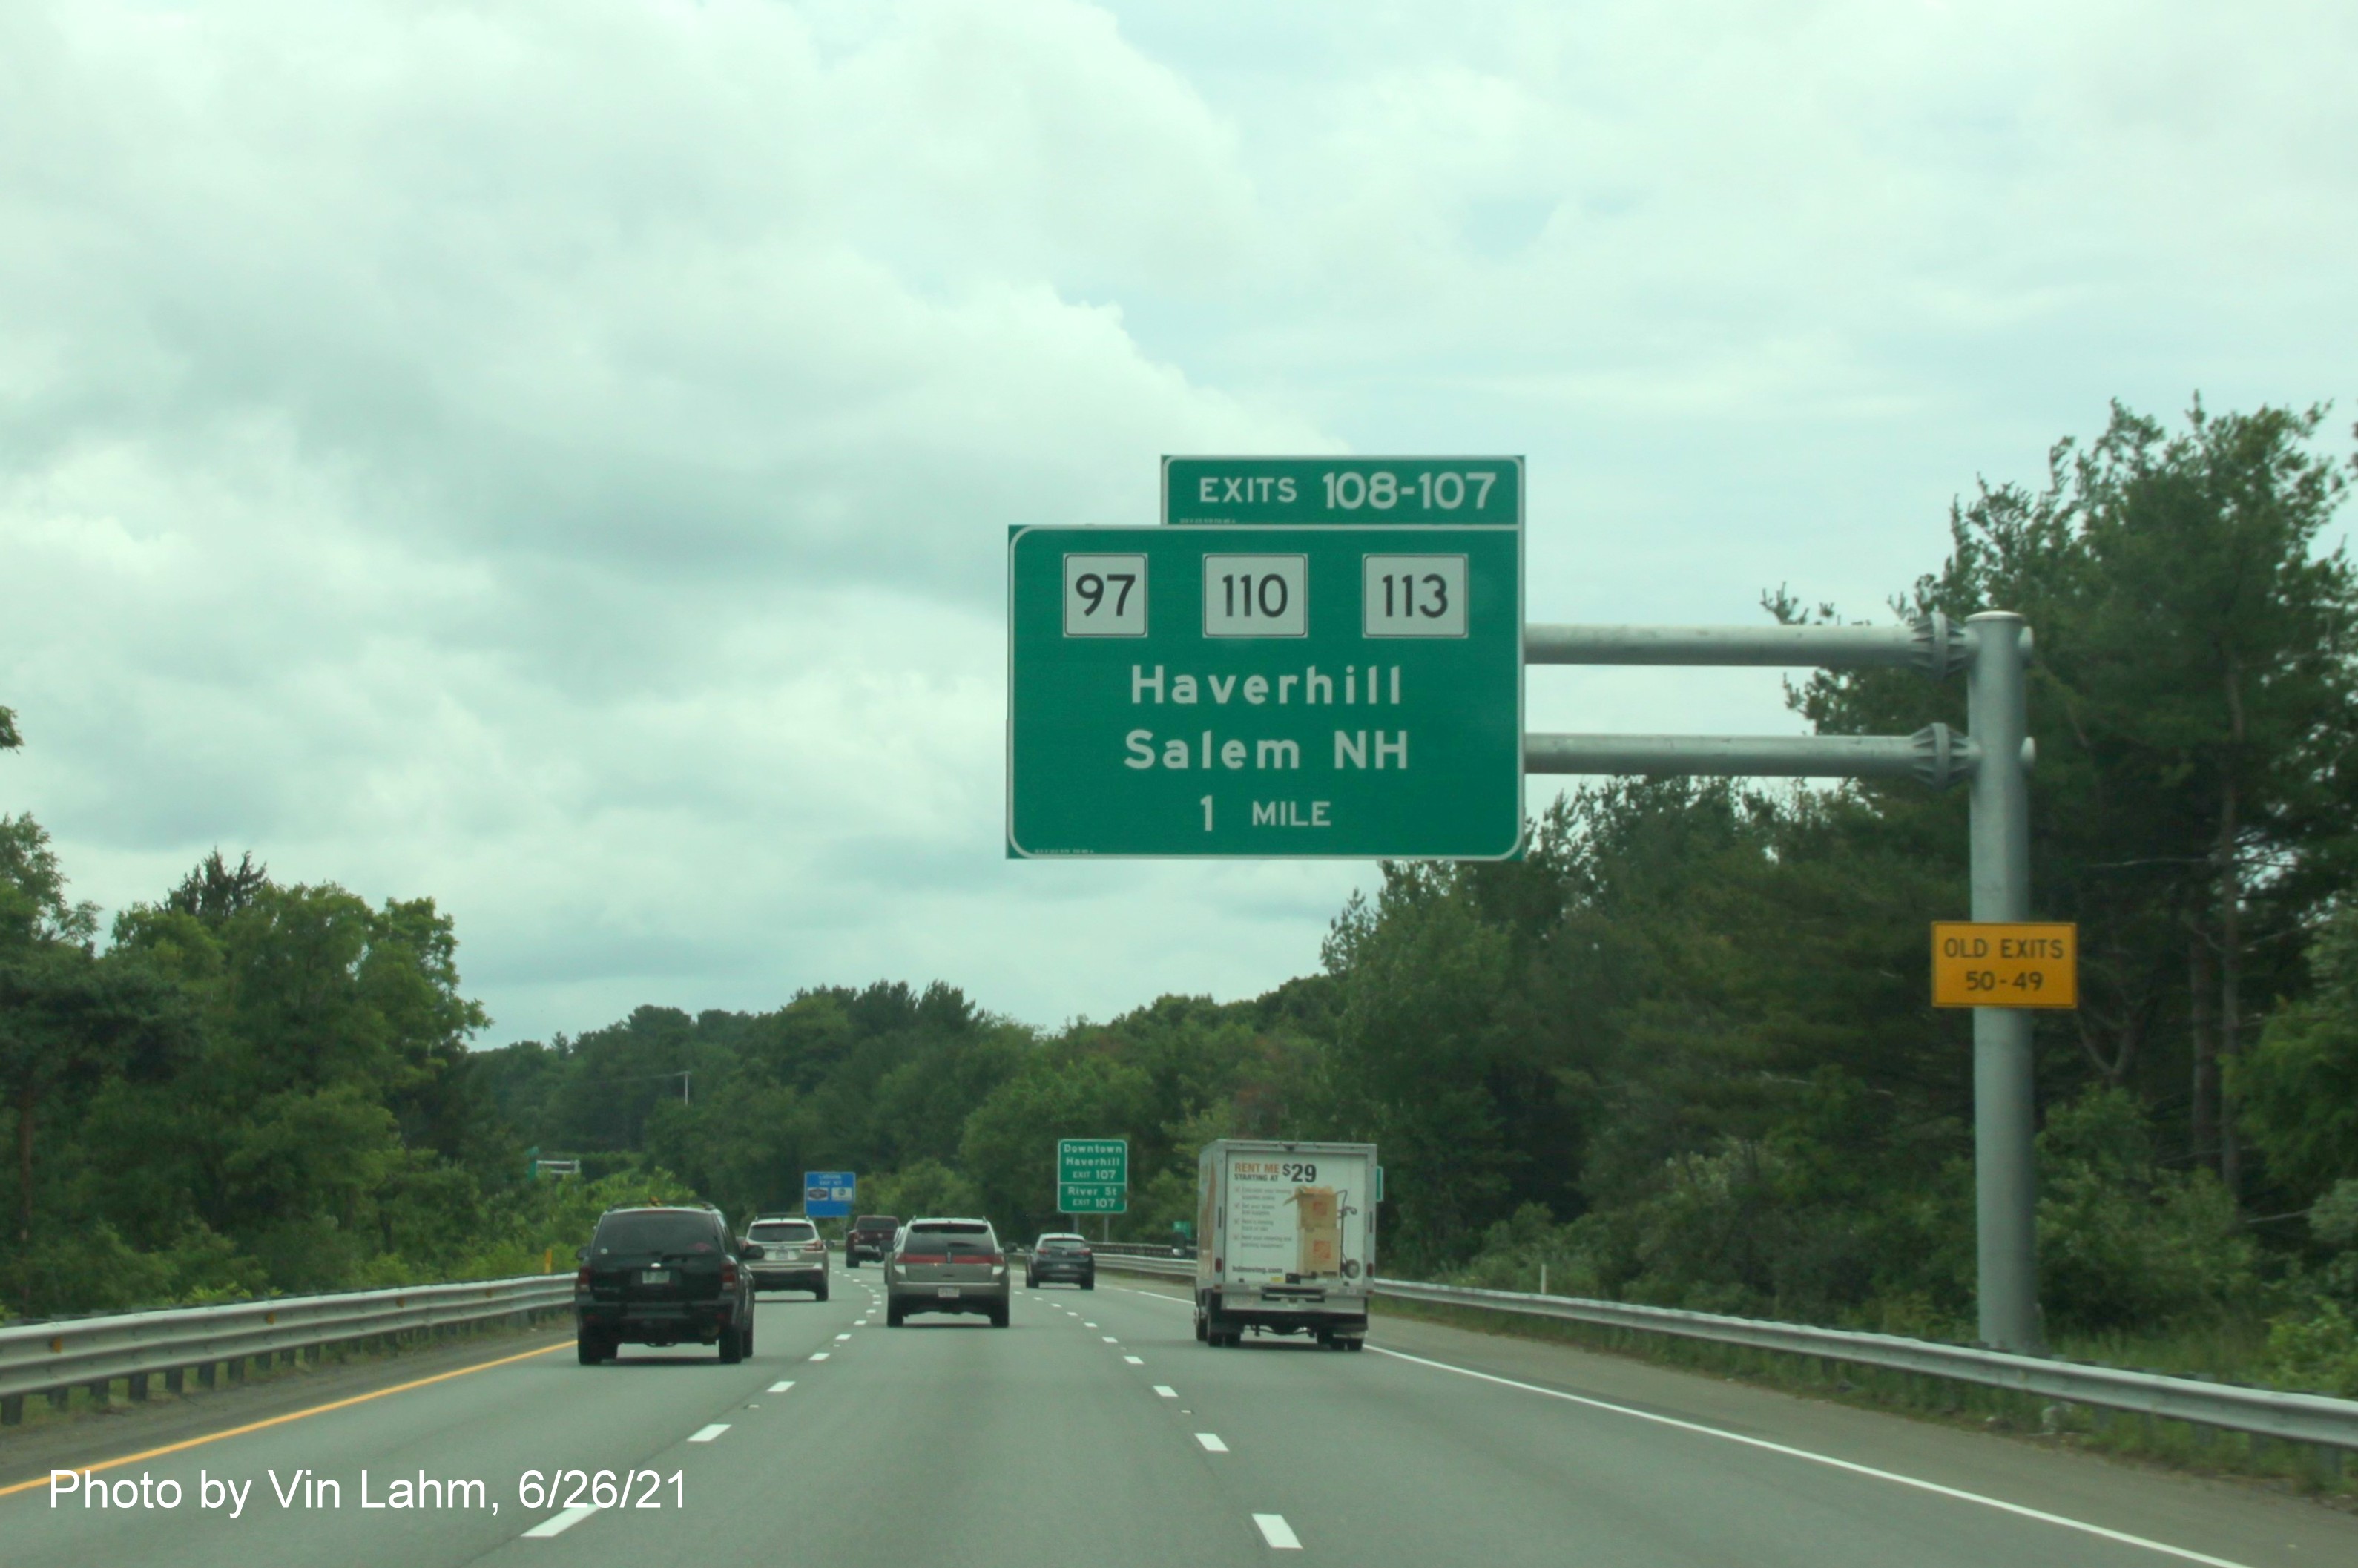 Image of 1 Mile advance overhead sign for MA 97 and MA 110/113 exits with new milepost based exit numbers and yellow Old Exits 50-49 advisory sign on support on I-495 South in Haverhill, photo by Vinh Lam, June 2021